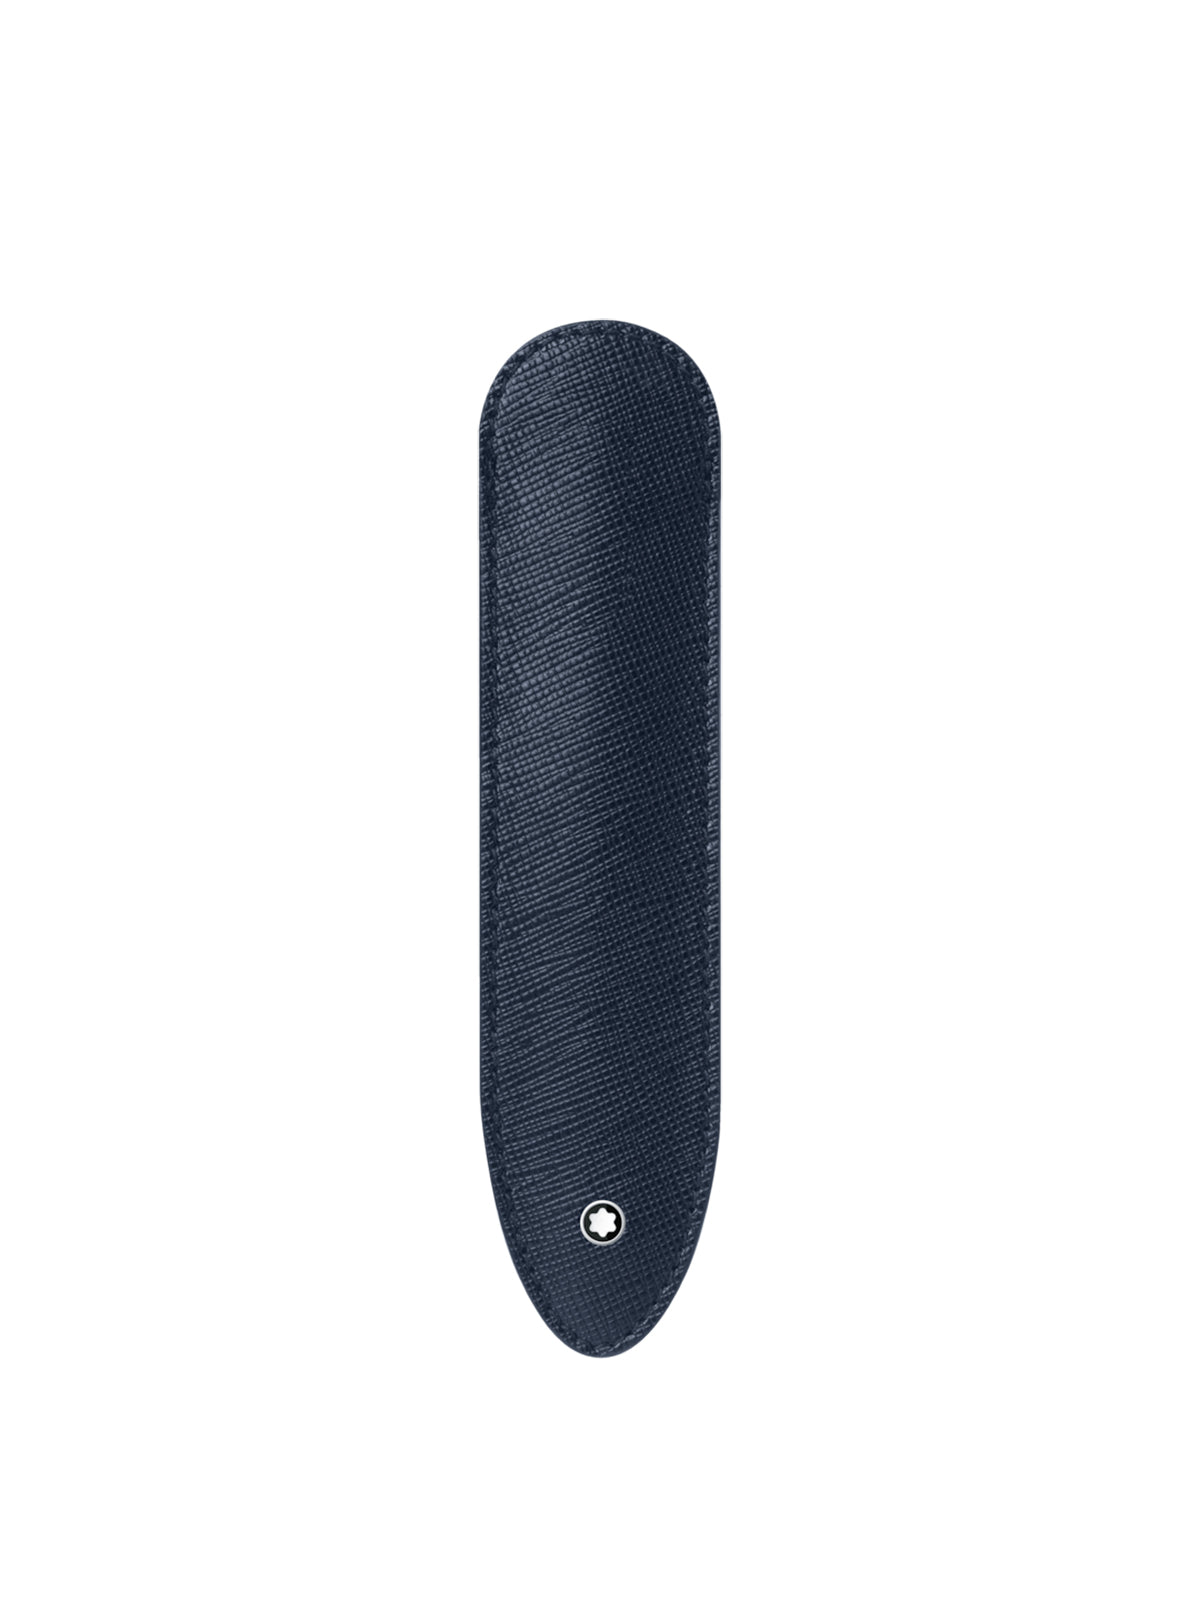 Montblanc Sartorial Navy Leather Pen Sleeve MB128603